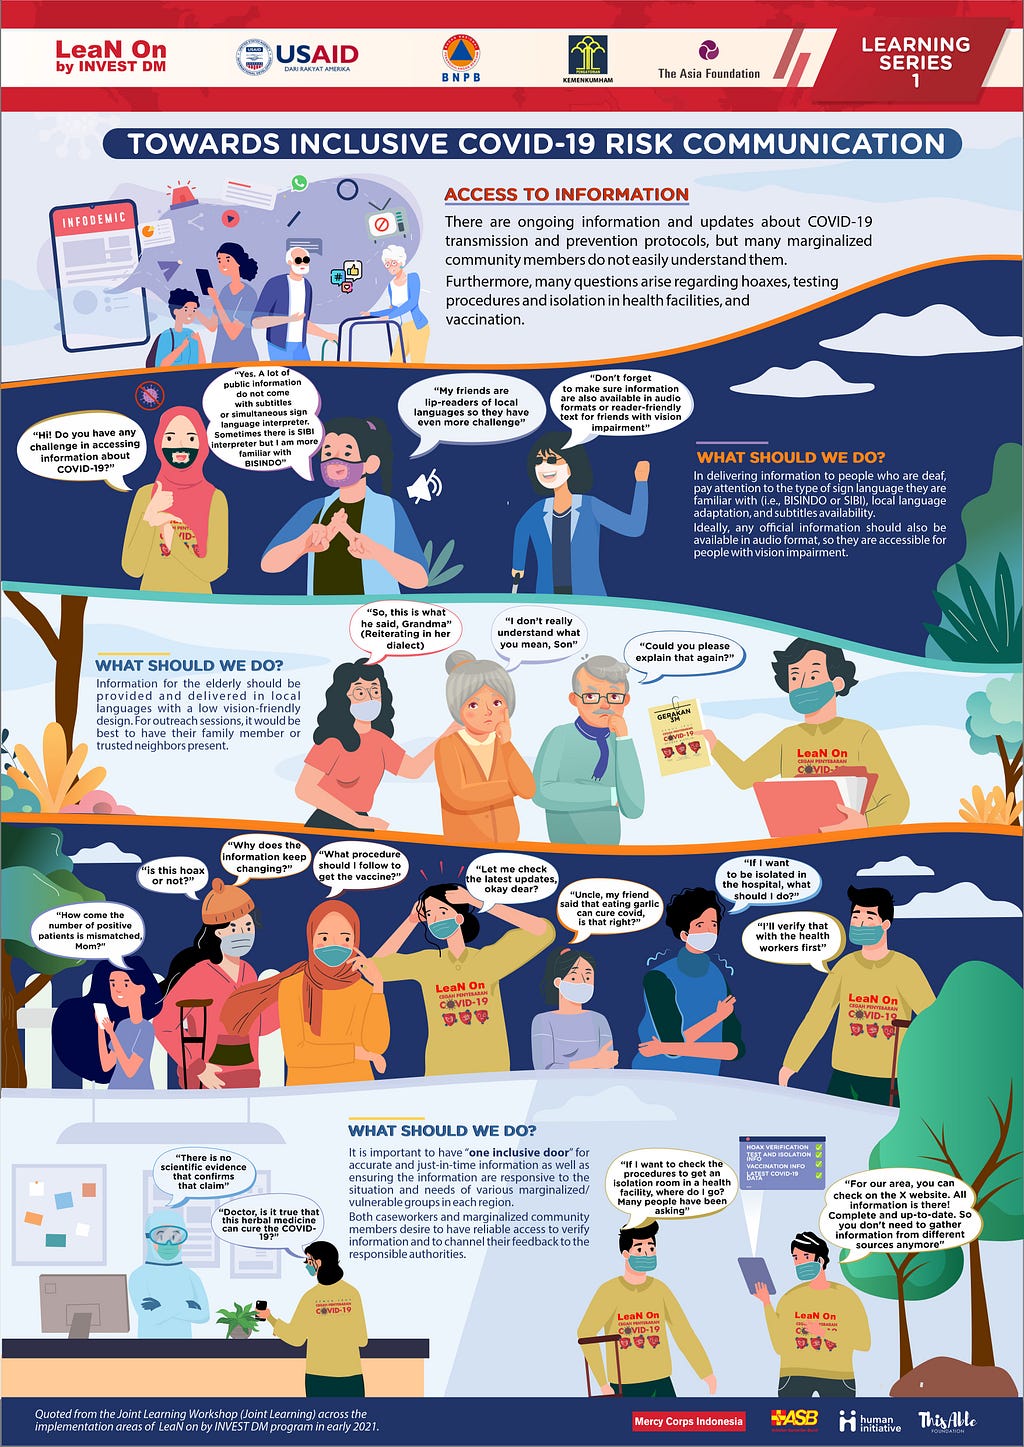 This infographic explains the challenges faced by persons with disabilities and other marginalized groups in accessing COVID-19 risk information, along with recommendations for more inclusive access to pandemic information. An audio version of the infographic will be added to this page soon.